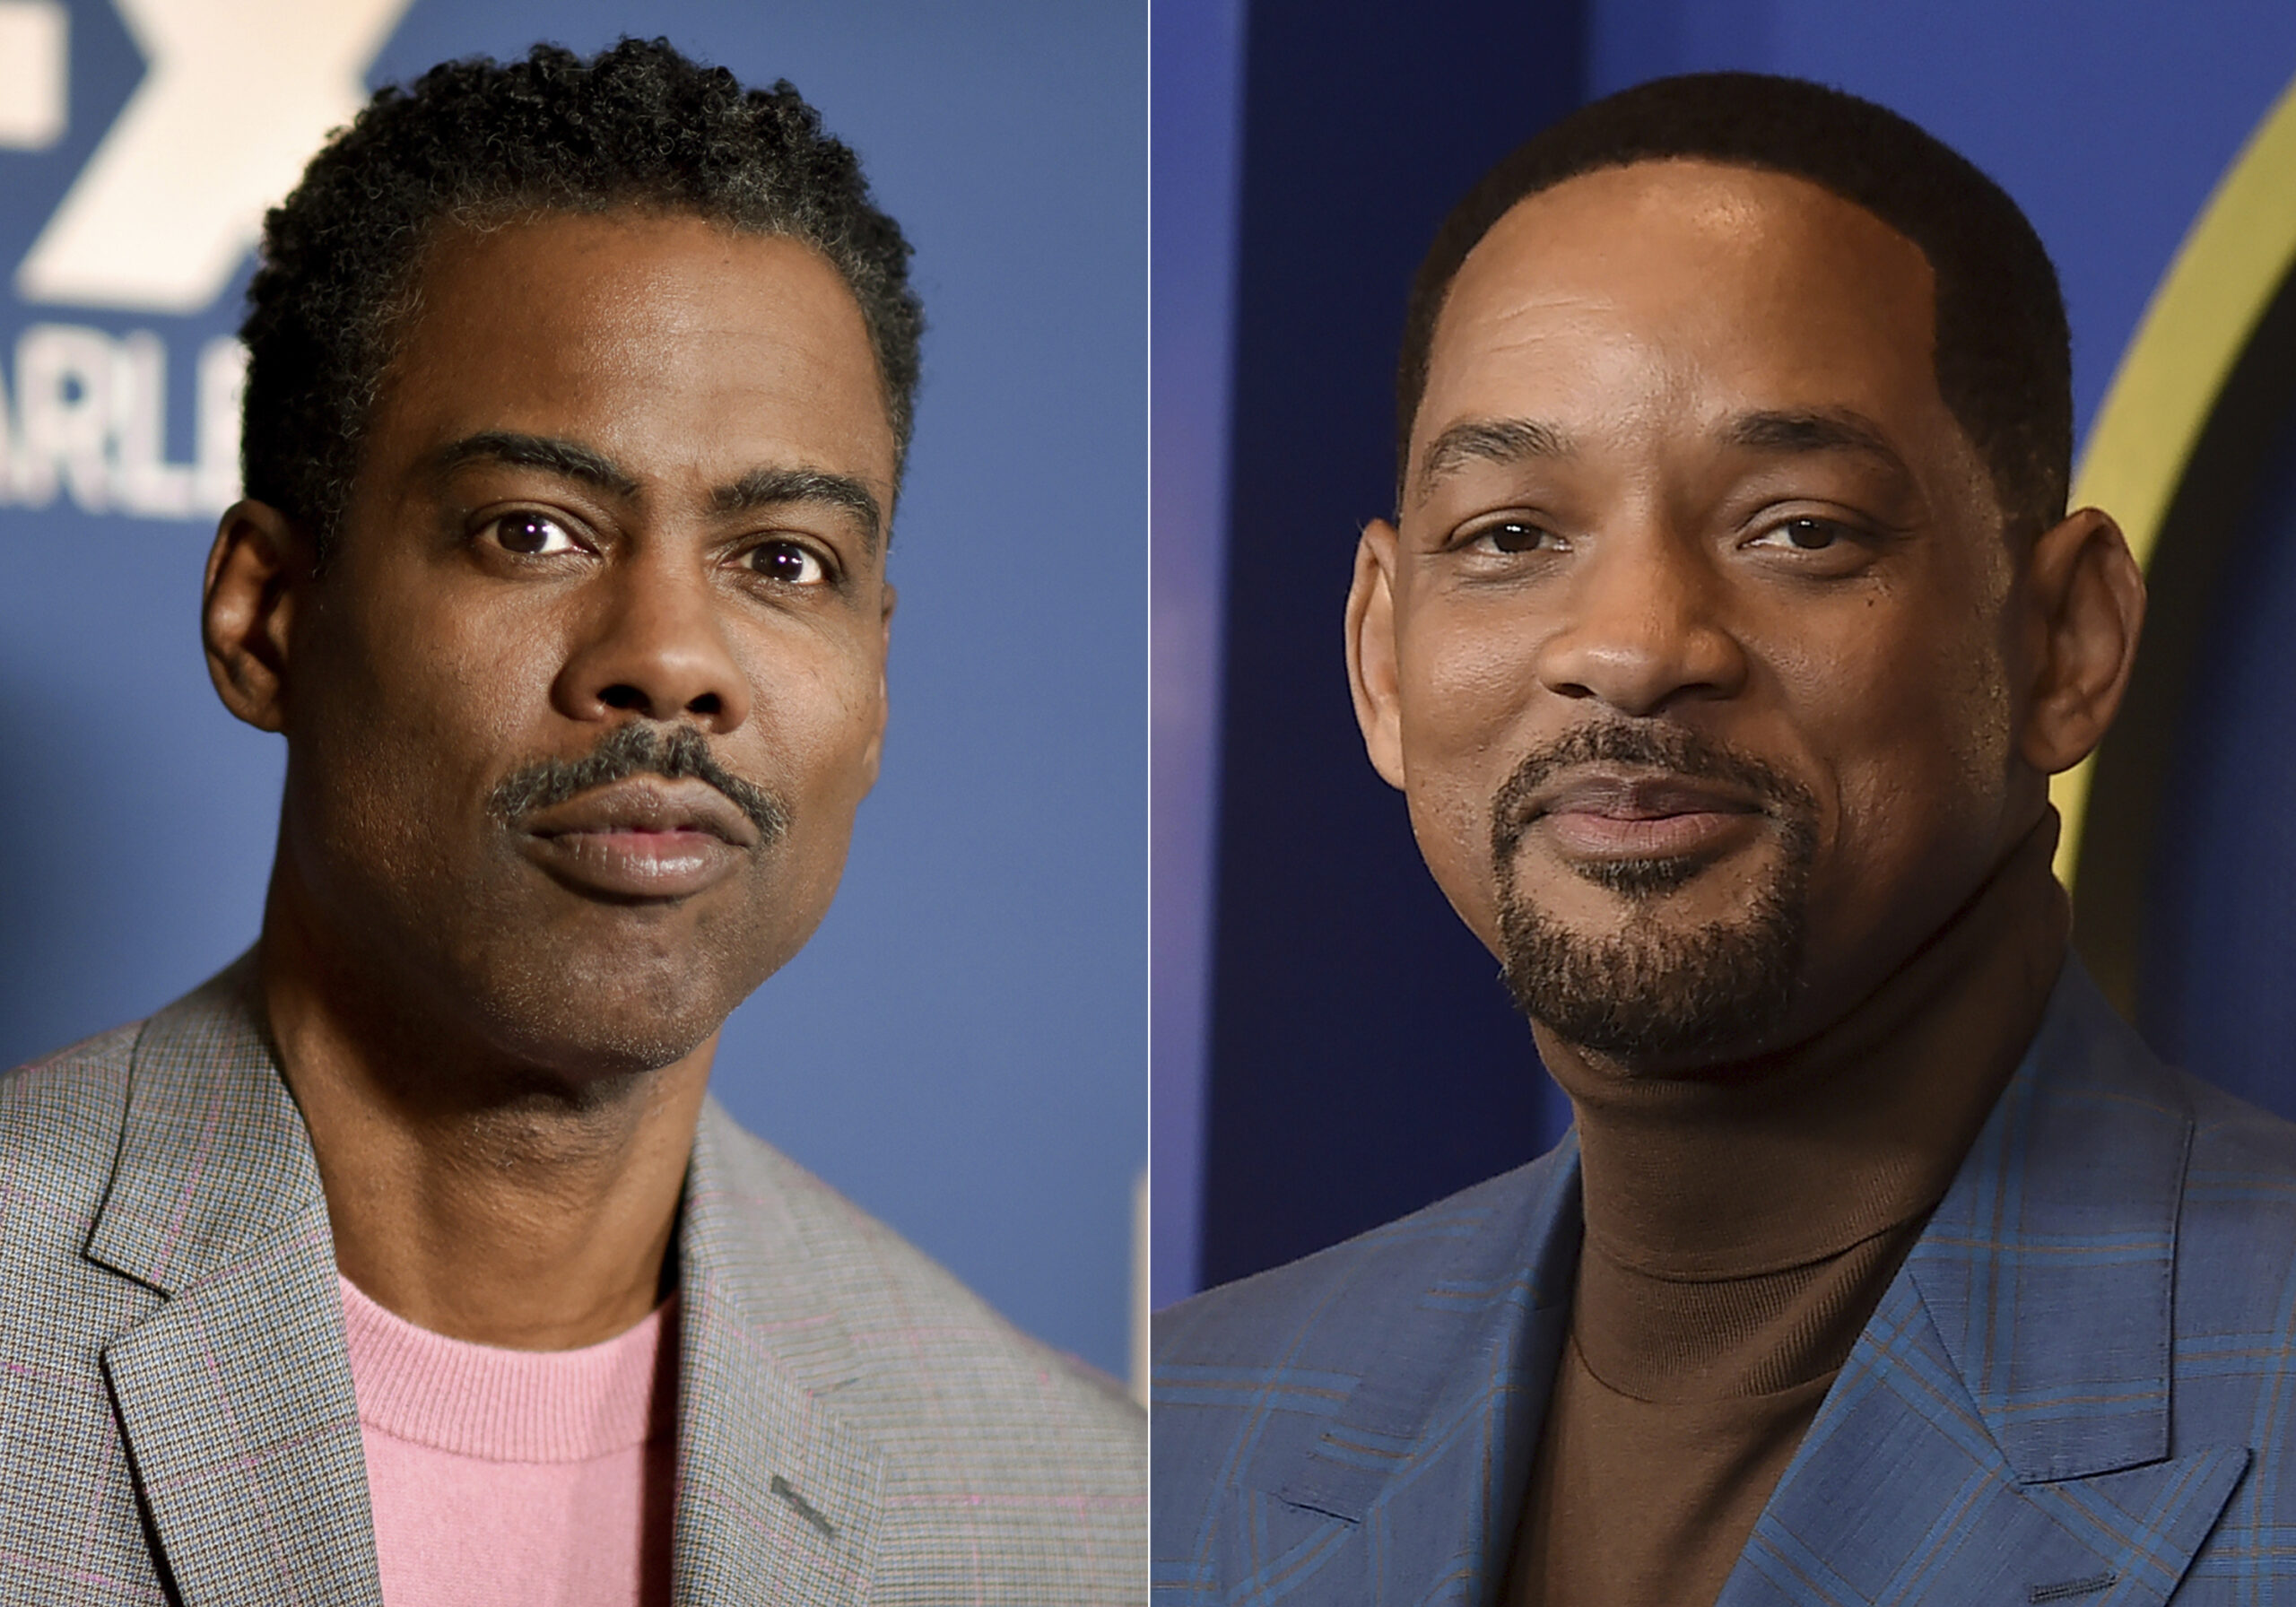 FILE - In this combo of file photos, Chris Rock, left, appears at the the FX portion of the Television Critics Association Winter press tour in Pasadena, Calif., on Jan. 9, 2020; and Will Smith appears at the 94th Academy Awards nominees luncheon in Los Angeles on March 7, 2022. Smith has again apologized to Chris Rock for slapping him during the Oscar telecast in a new video, saying that his behavior was “unacceptable” and revealing that he reached out to the comedian to discuss the incident but was told Rock wasn't ready. (AP Photo/File)